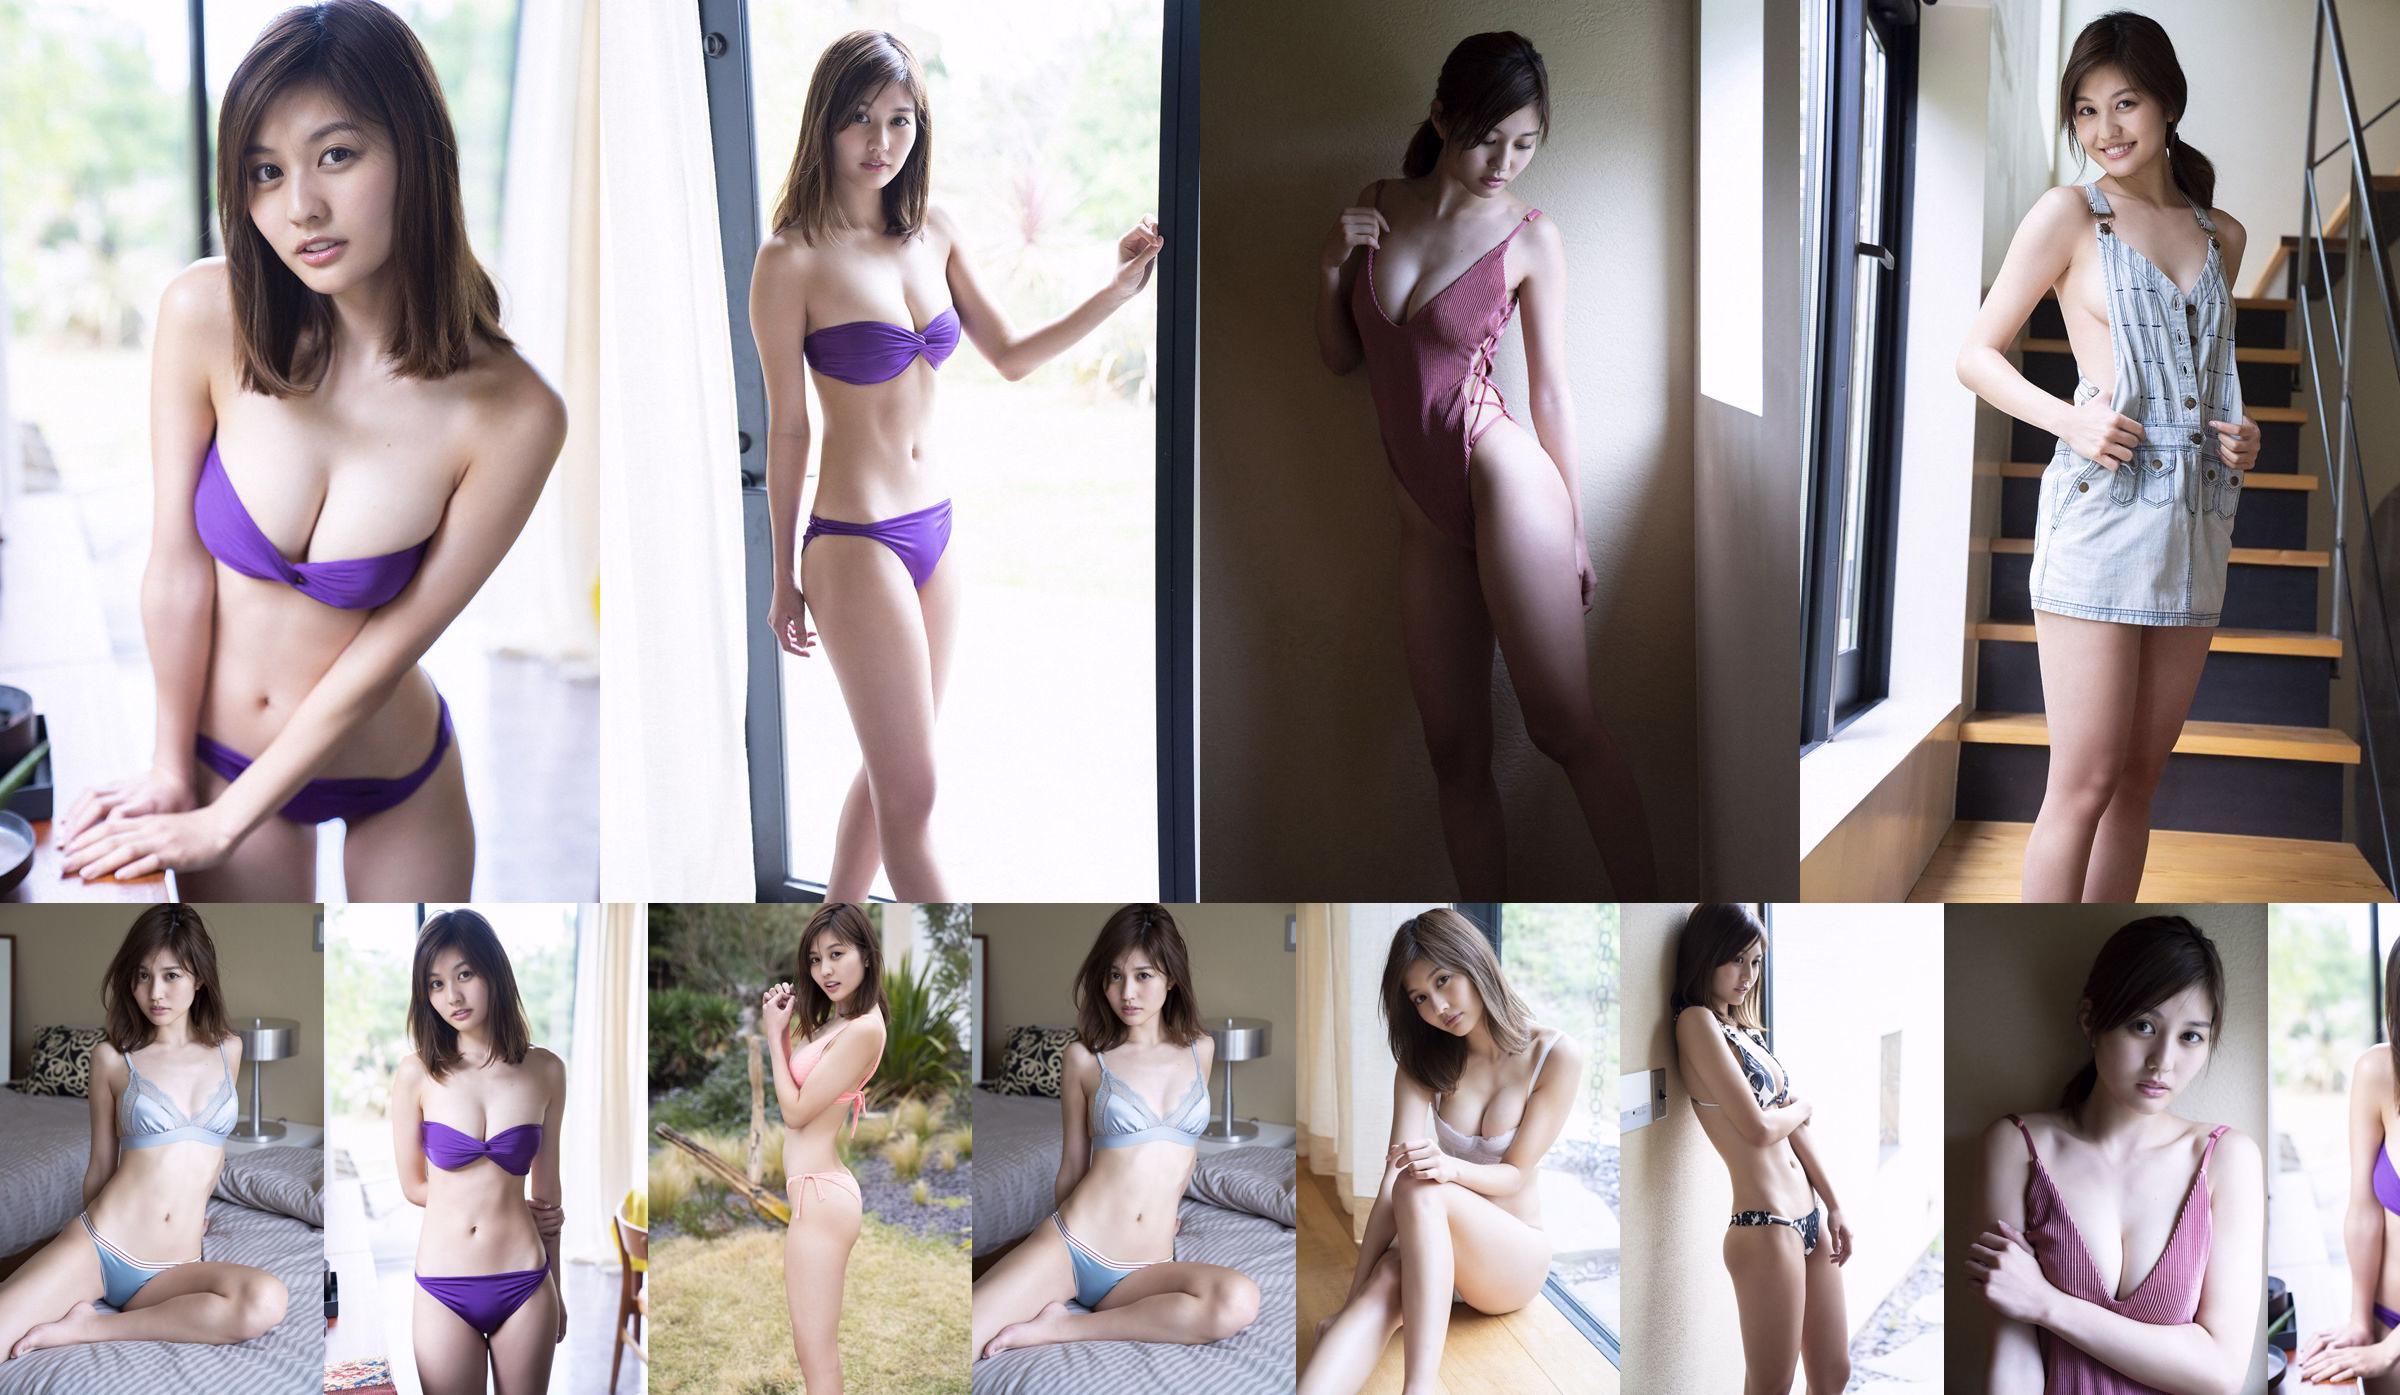 Yume Hayashi "Look at it because the style is really amazing !!" [WPB-net] Extra731 No.6cd2cf Page 2